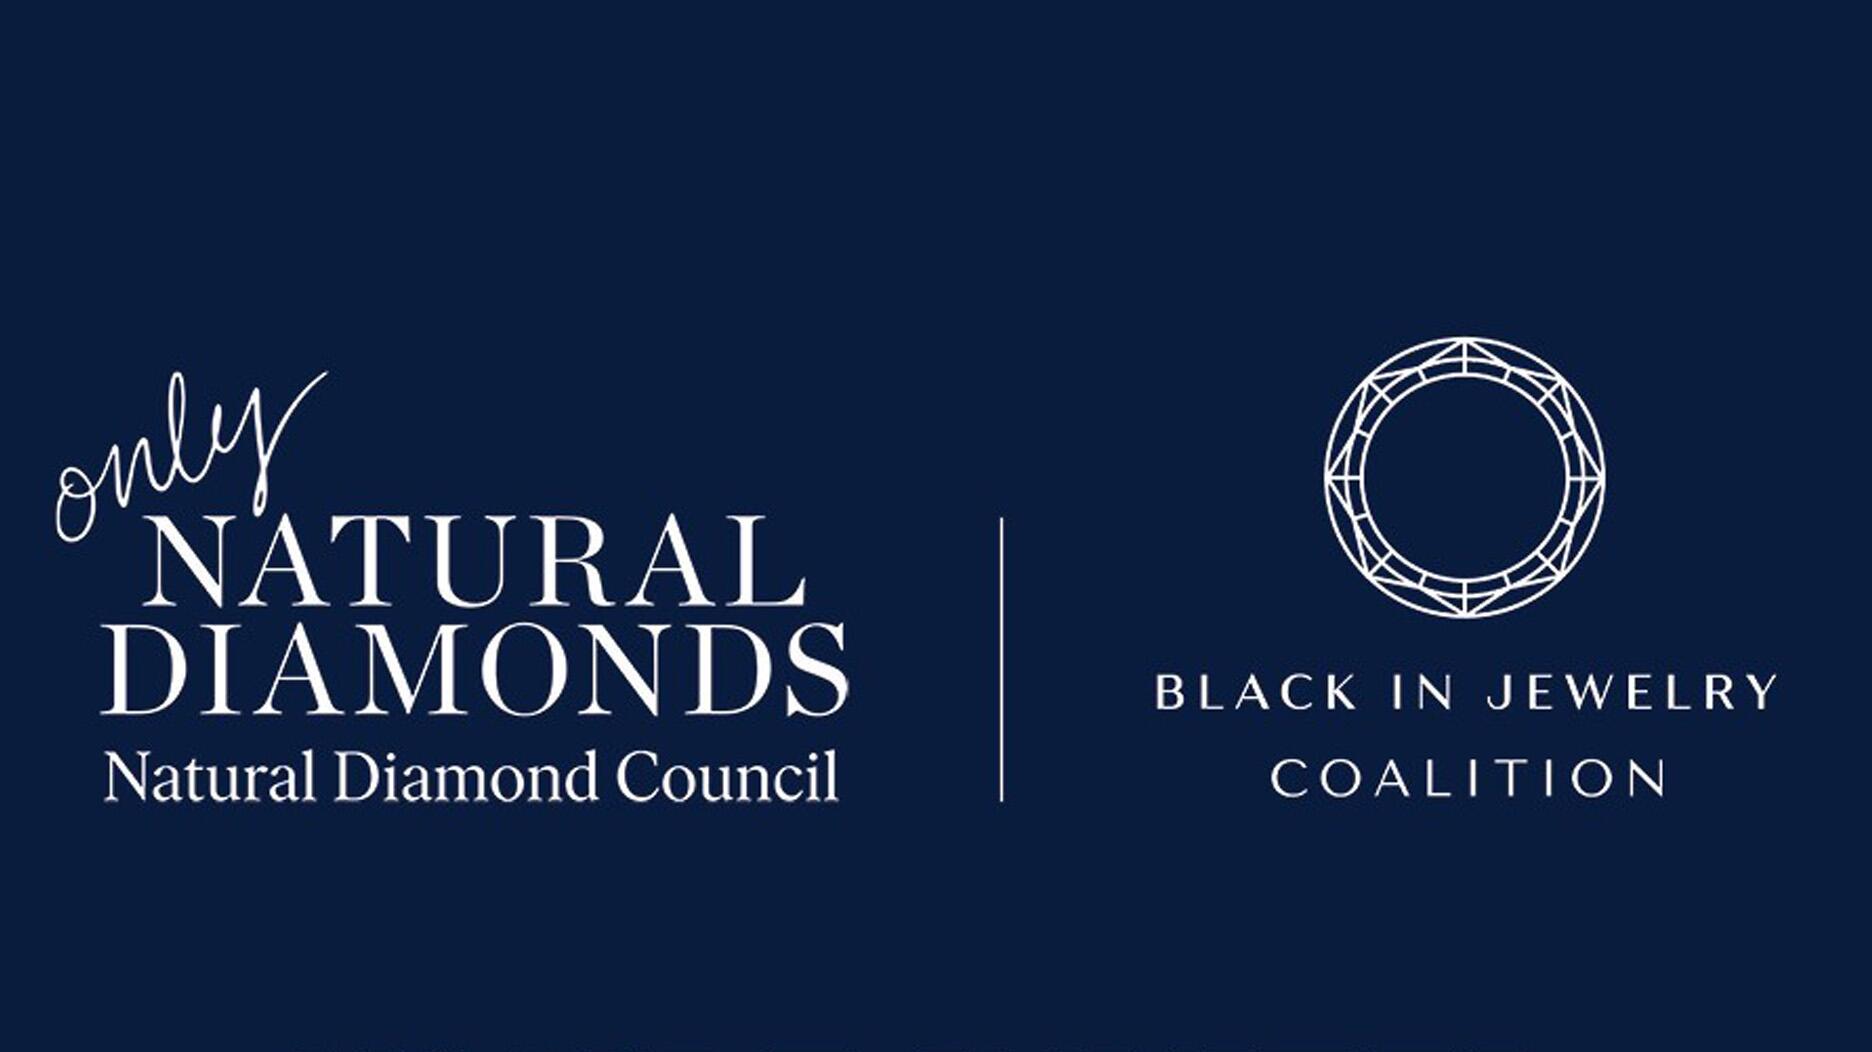 Natural Diamond Council and Black in Jewelry Coalition logos 